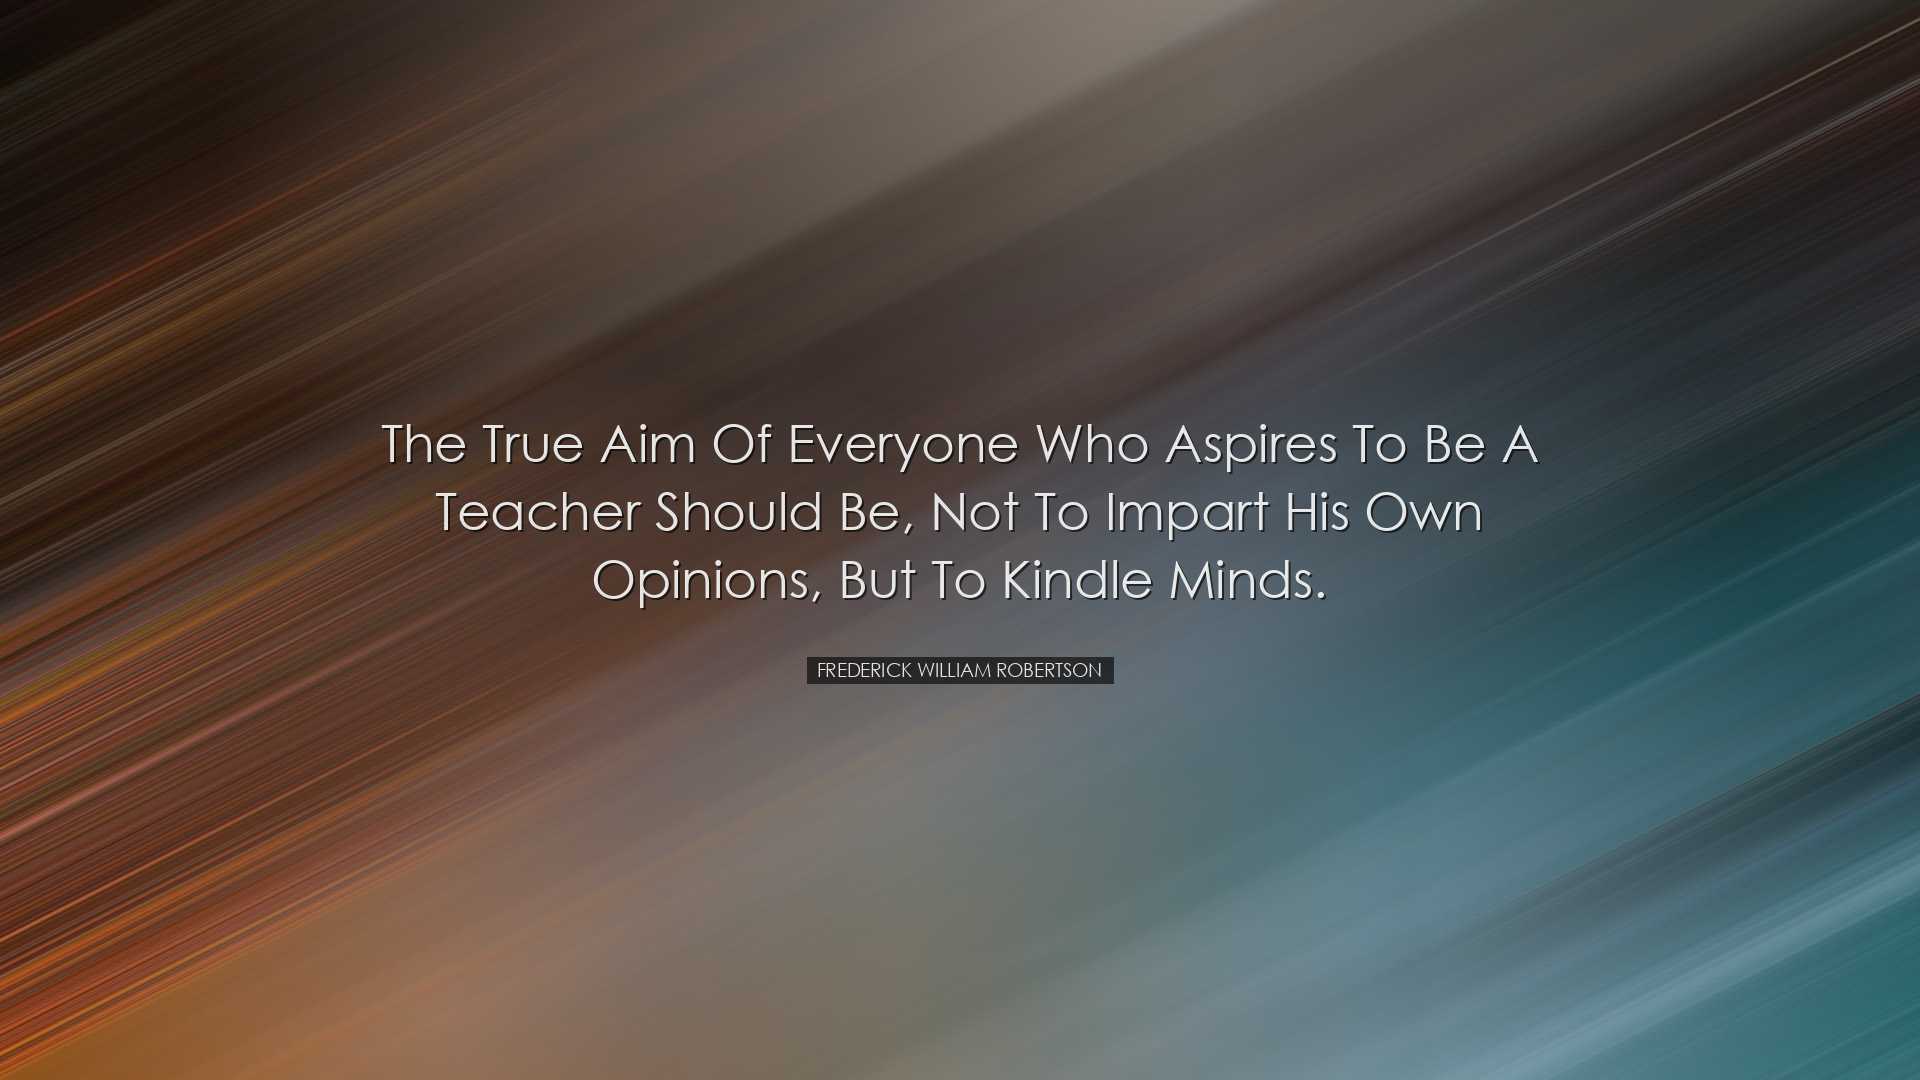 The true aim of everyone who aspires to be a teacher should be, no